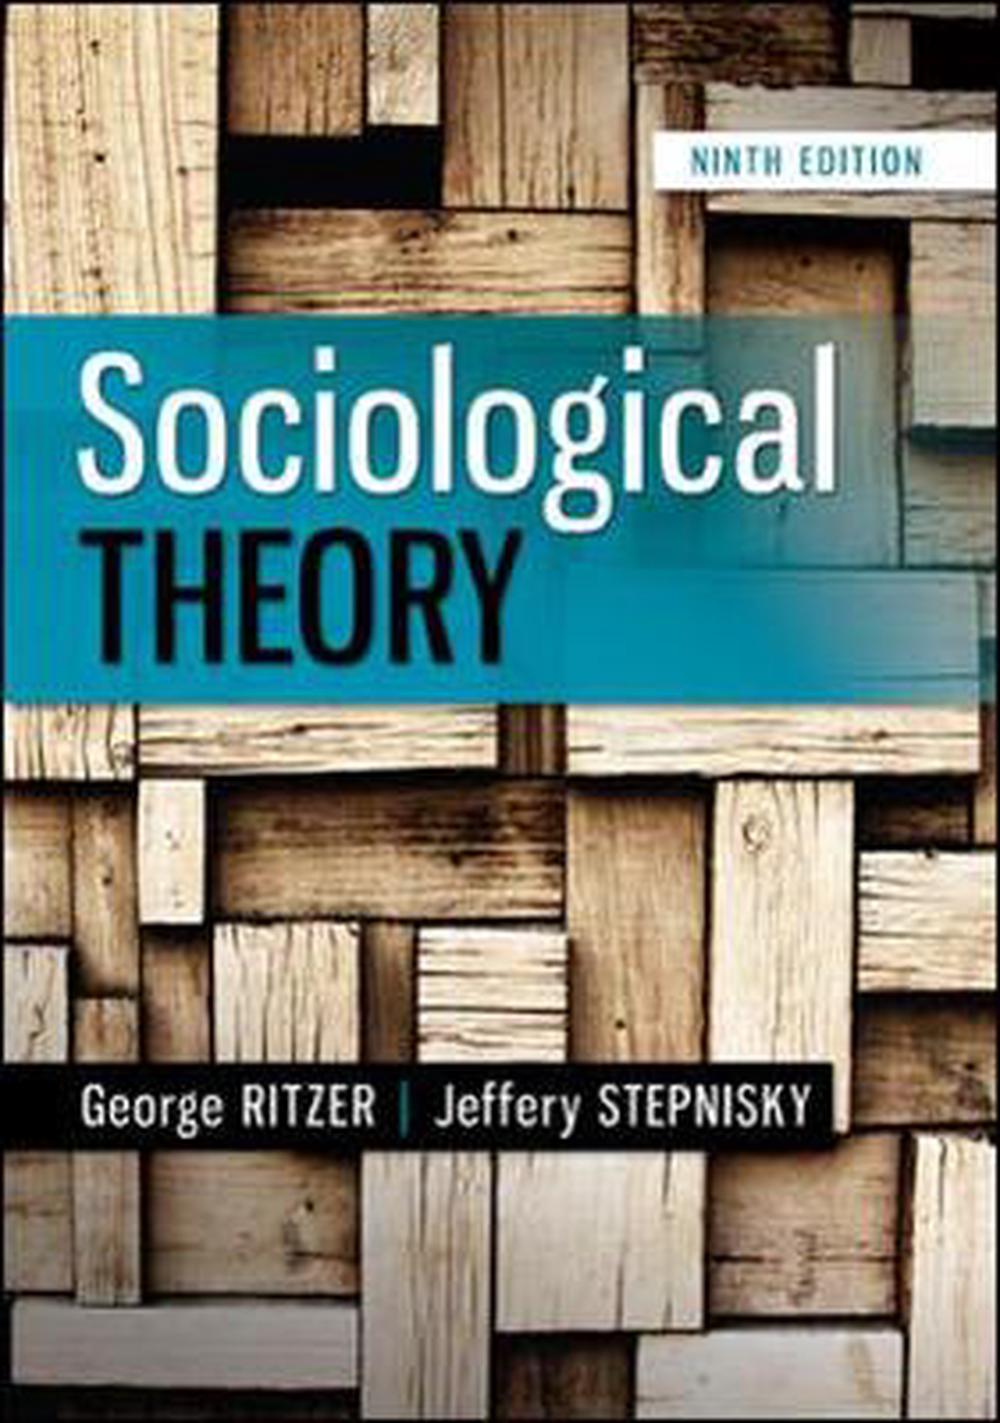 Sociological Theory 9th Edition by Ritzer (English) Hardcover Book Free S 9780078027017